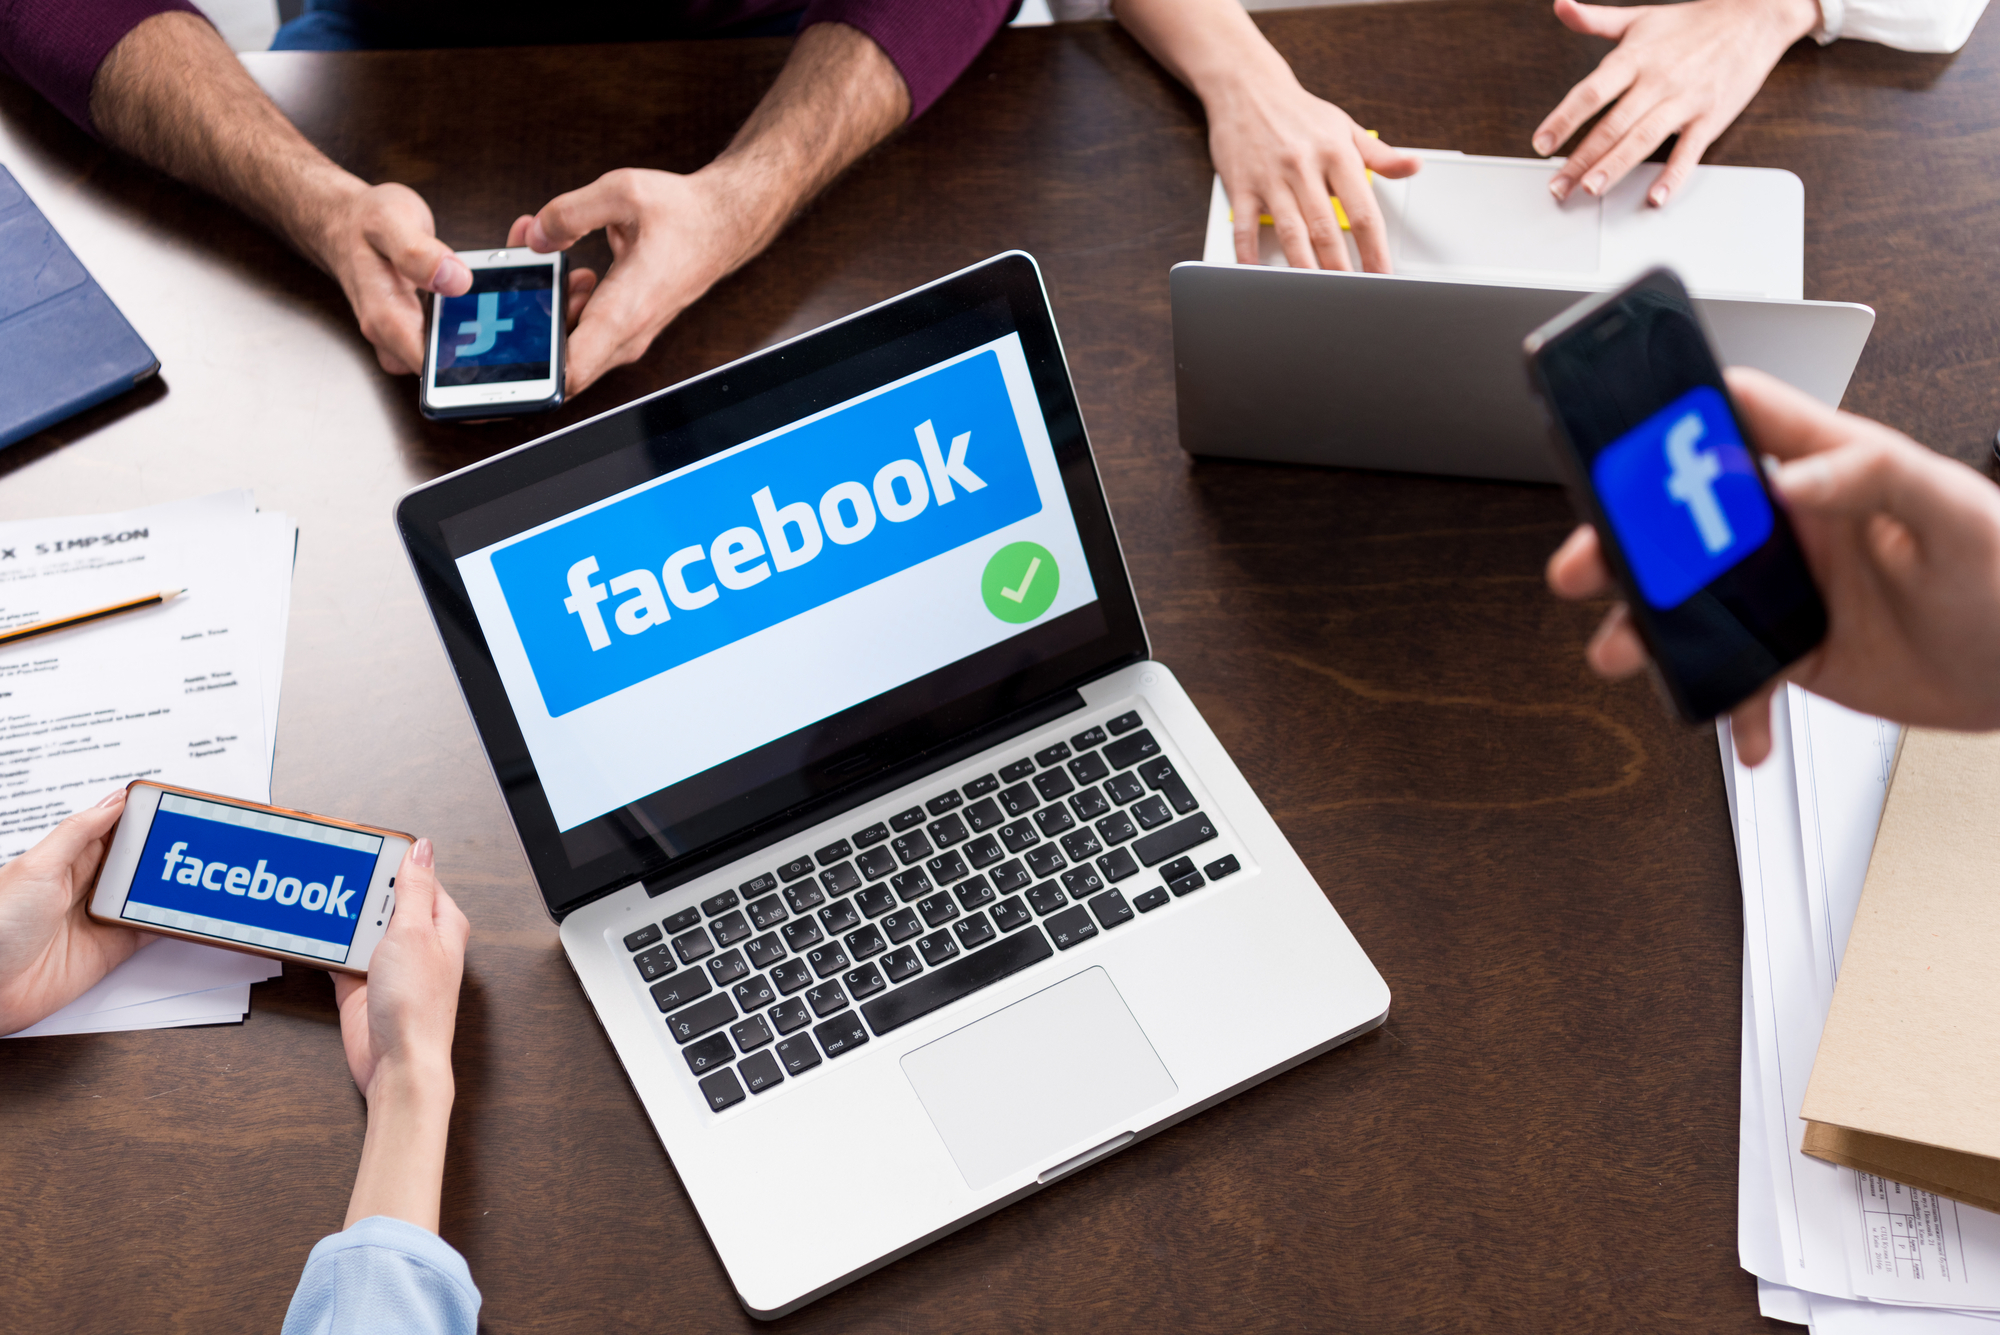 How To Use Facebook For Business 101: The Amazing Facebook Masterclass [Video]